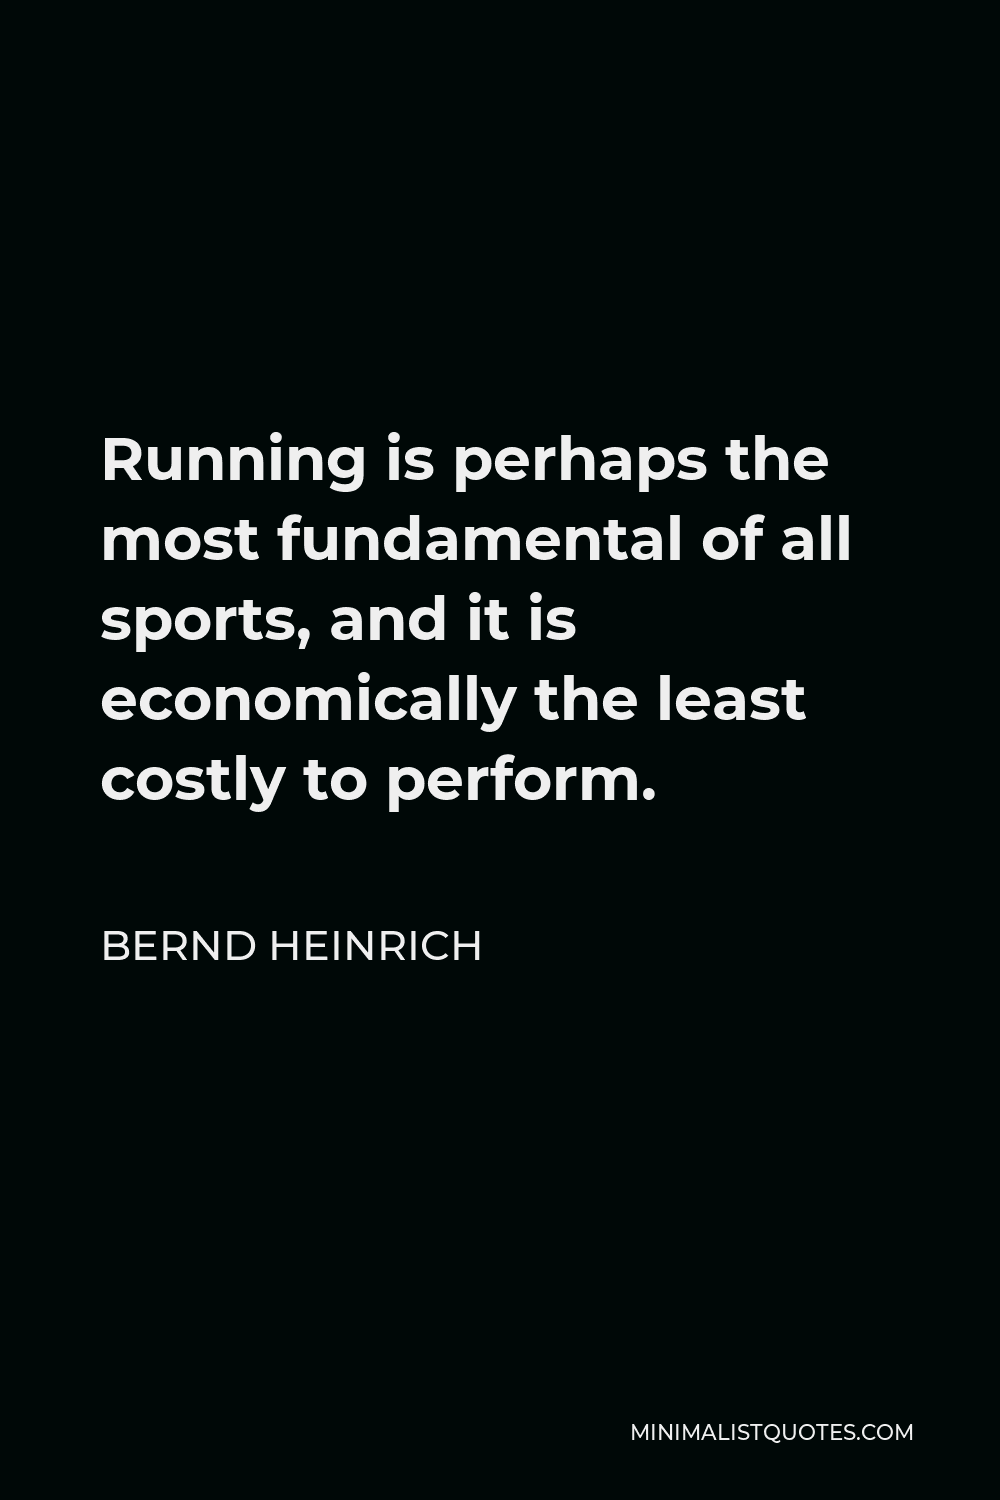 Bernd Heinrich Quote - Running is perhaps the most fundamental of all sports, and it is economically the least costly to perform.